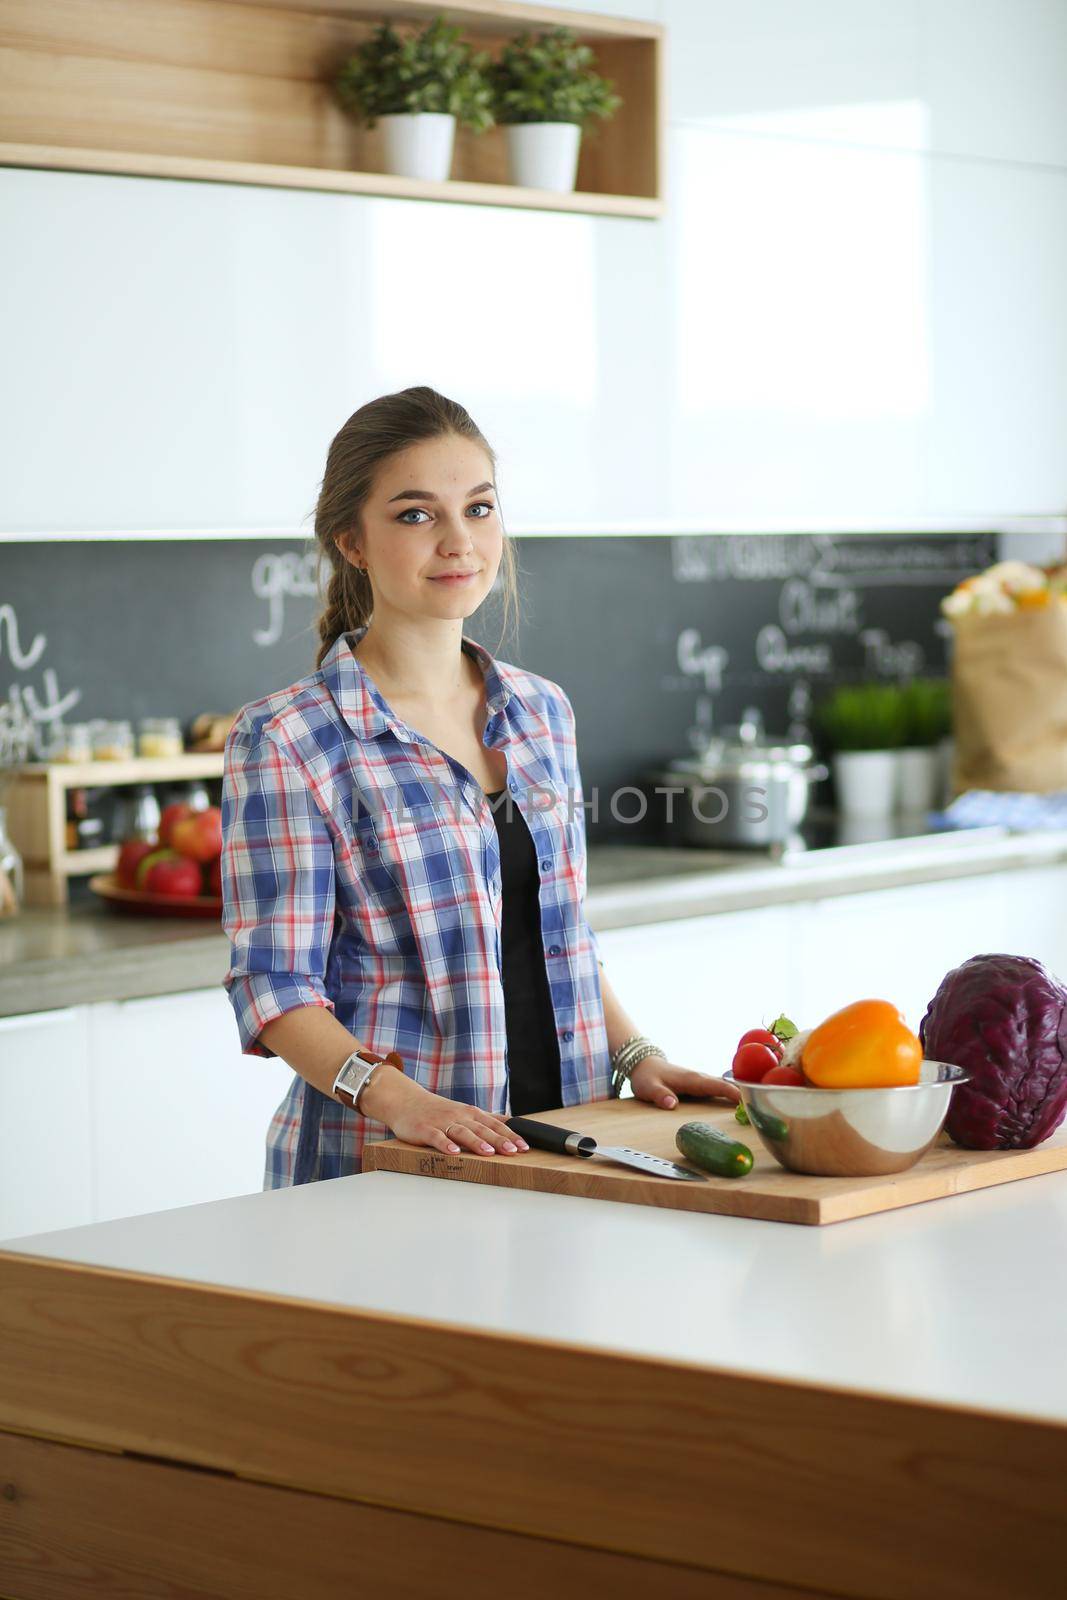 Young woman cutting vegetables in kitchen near desk.